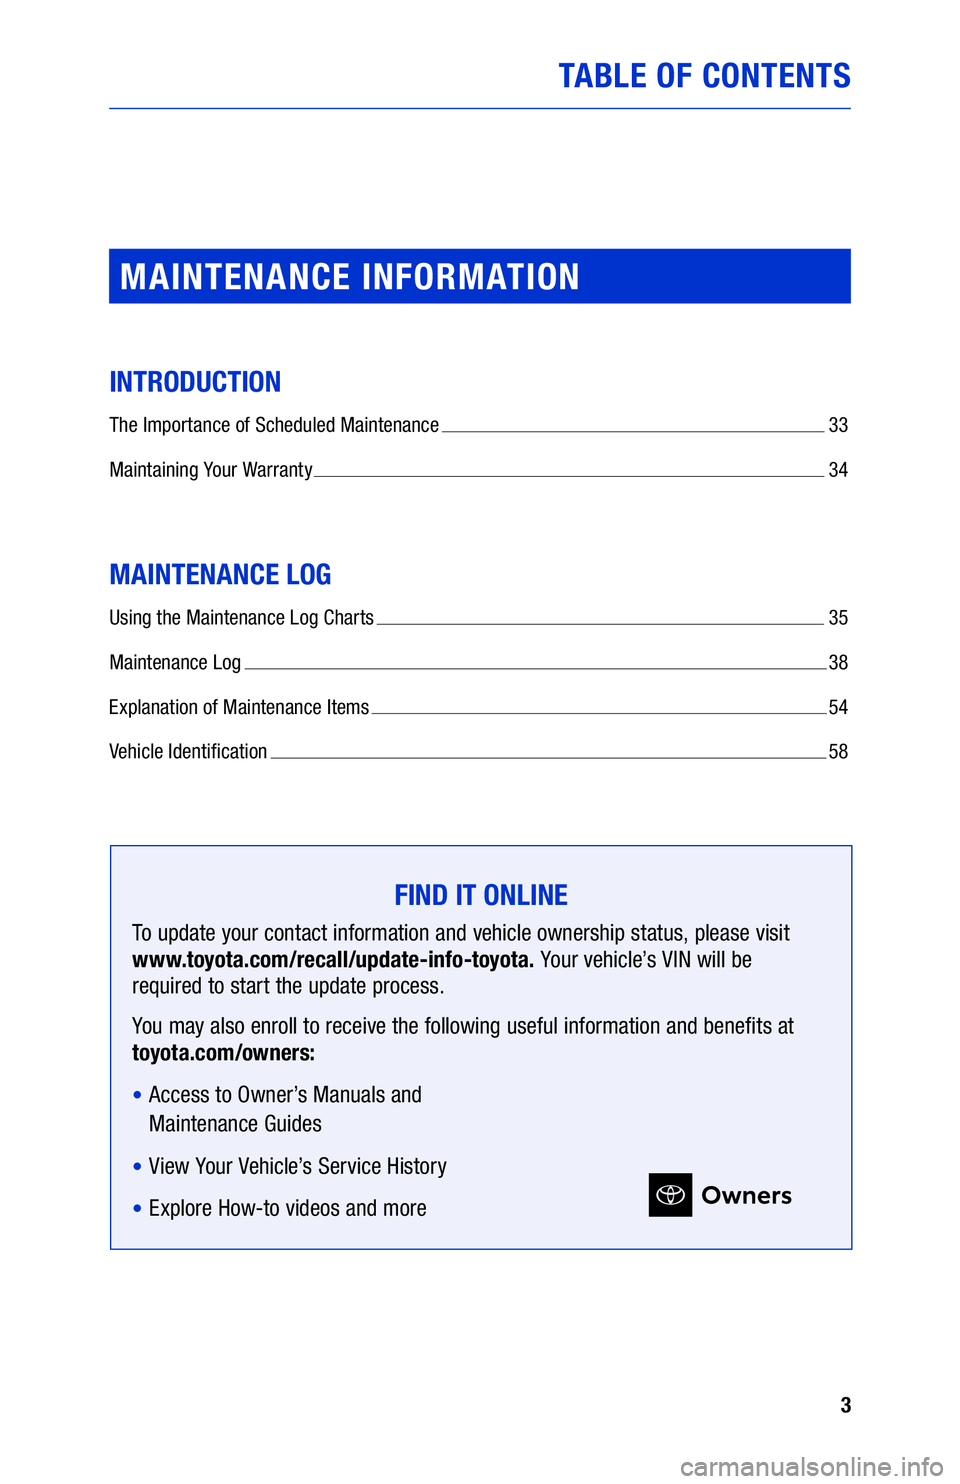 TOYOTA 4RUNNER 2021  Warranties & Maintenance Guides (in English) 3
TABLE OF CONTENTS
MAINTENANCE INFORMATION
INTRODUCTION
The Importance of Scheduled Maintenance  33
Maintaining Your Warranty 
  34
MAINTENANCE LOG
Using the Maintenance Log Charts   35
Maintenance L